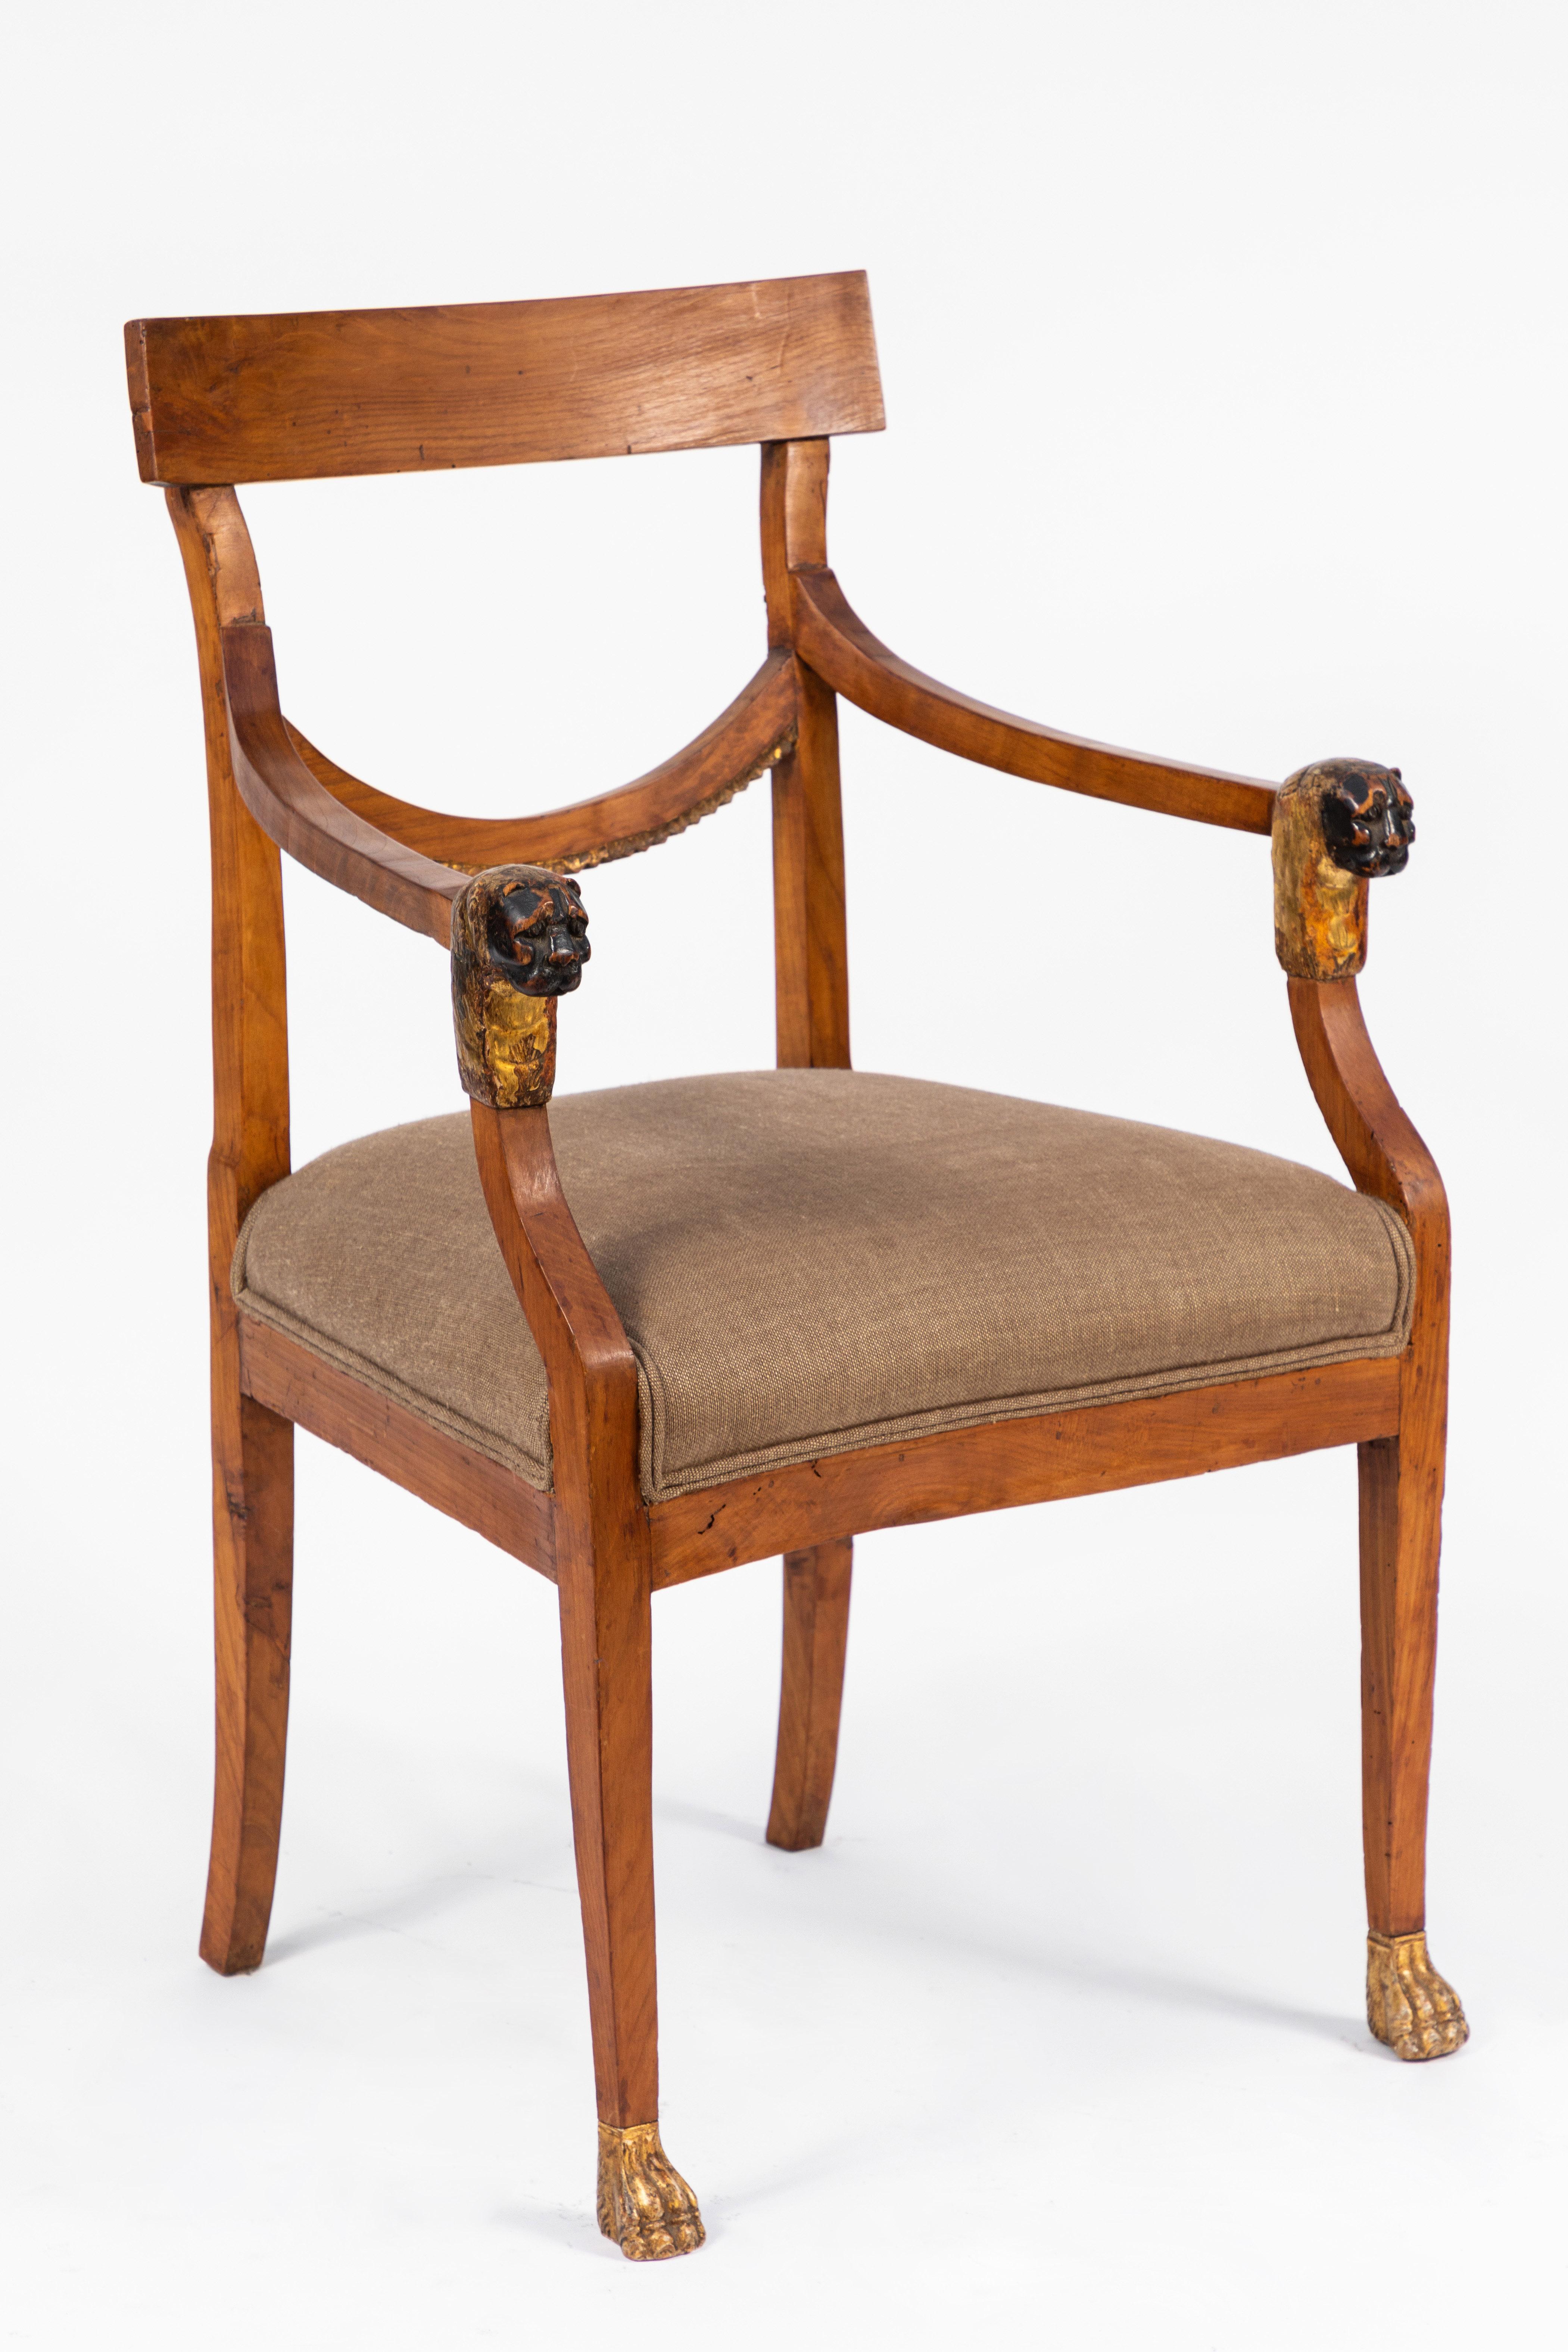 Pair of 19th century Italian walnut armchairs with carved giltwood details. Carved lion's head and paw motif.